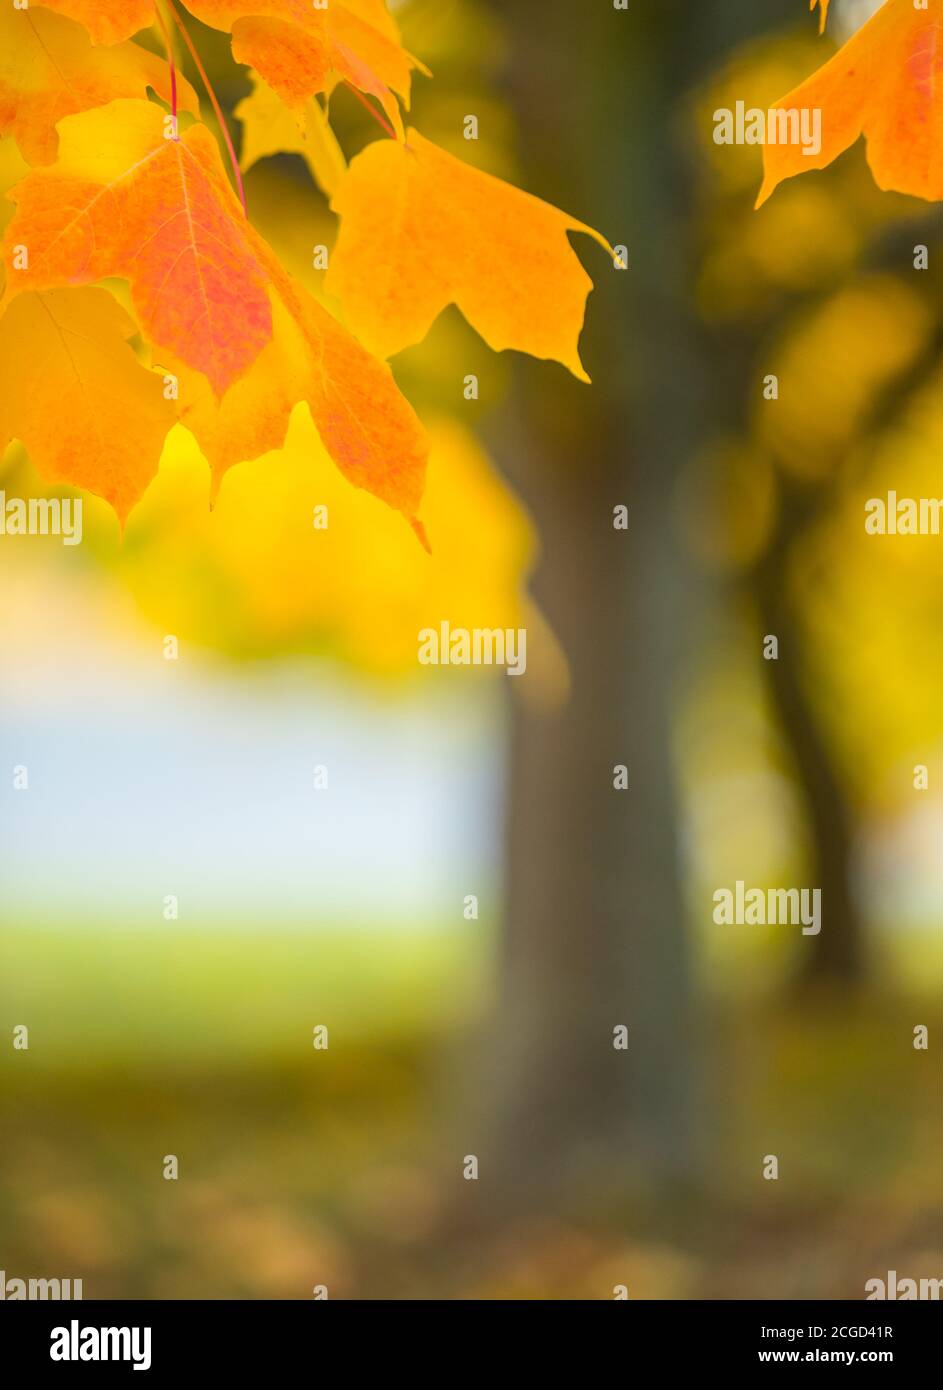 Abstract colourful autumn leaves with blur tree on background. Free space for text, holidays motive. Stock Photo